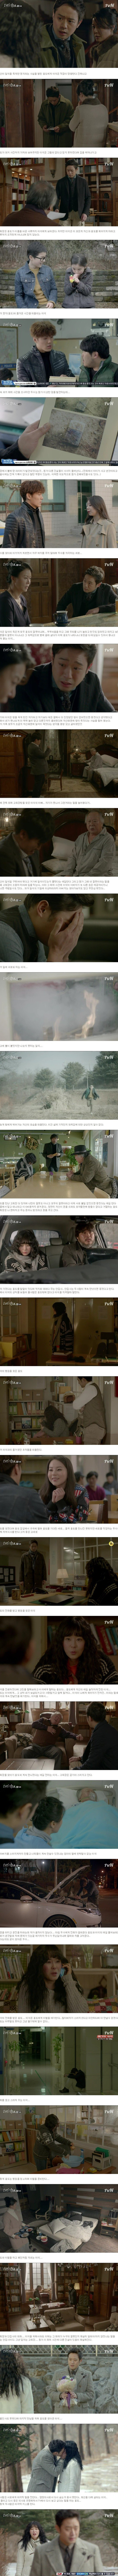 episodes 13 and 14 captures for the Korean drama 'Heart to Heart'